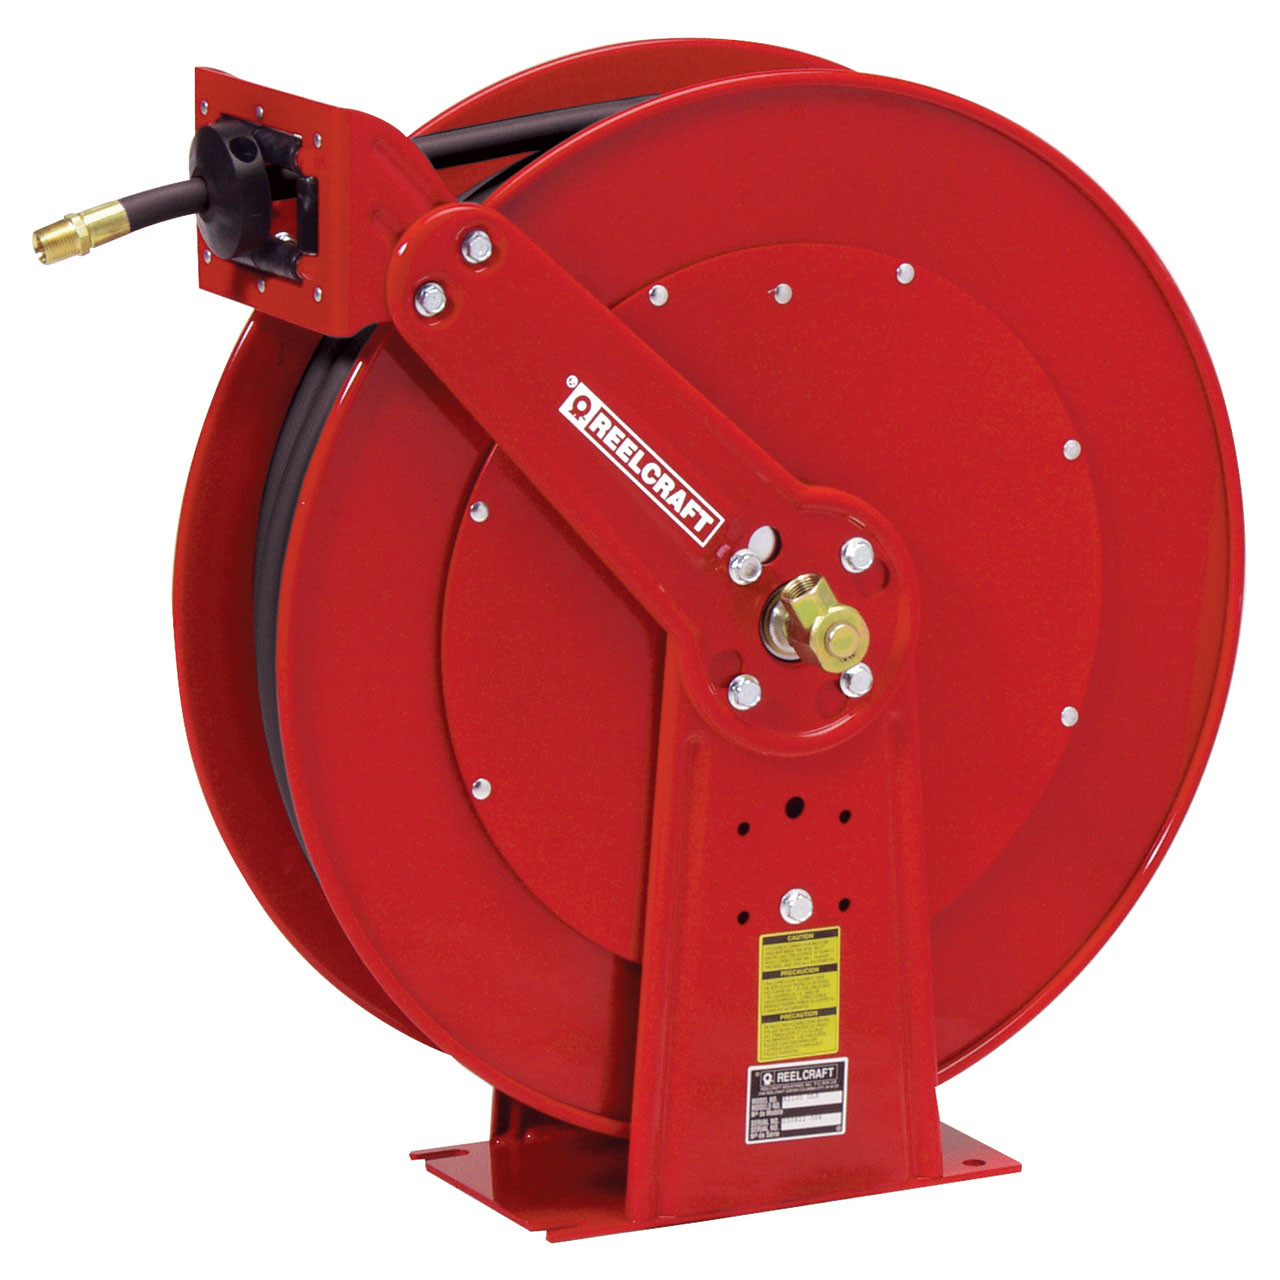 Reelcraft pw81100-ohp 3/8 x 100' 4800psi Pressure Wash Hose Reel